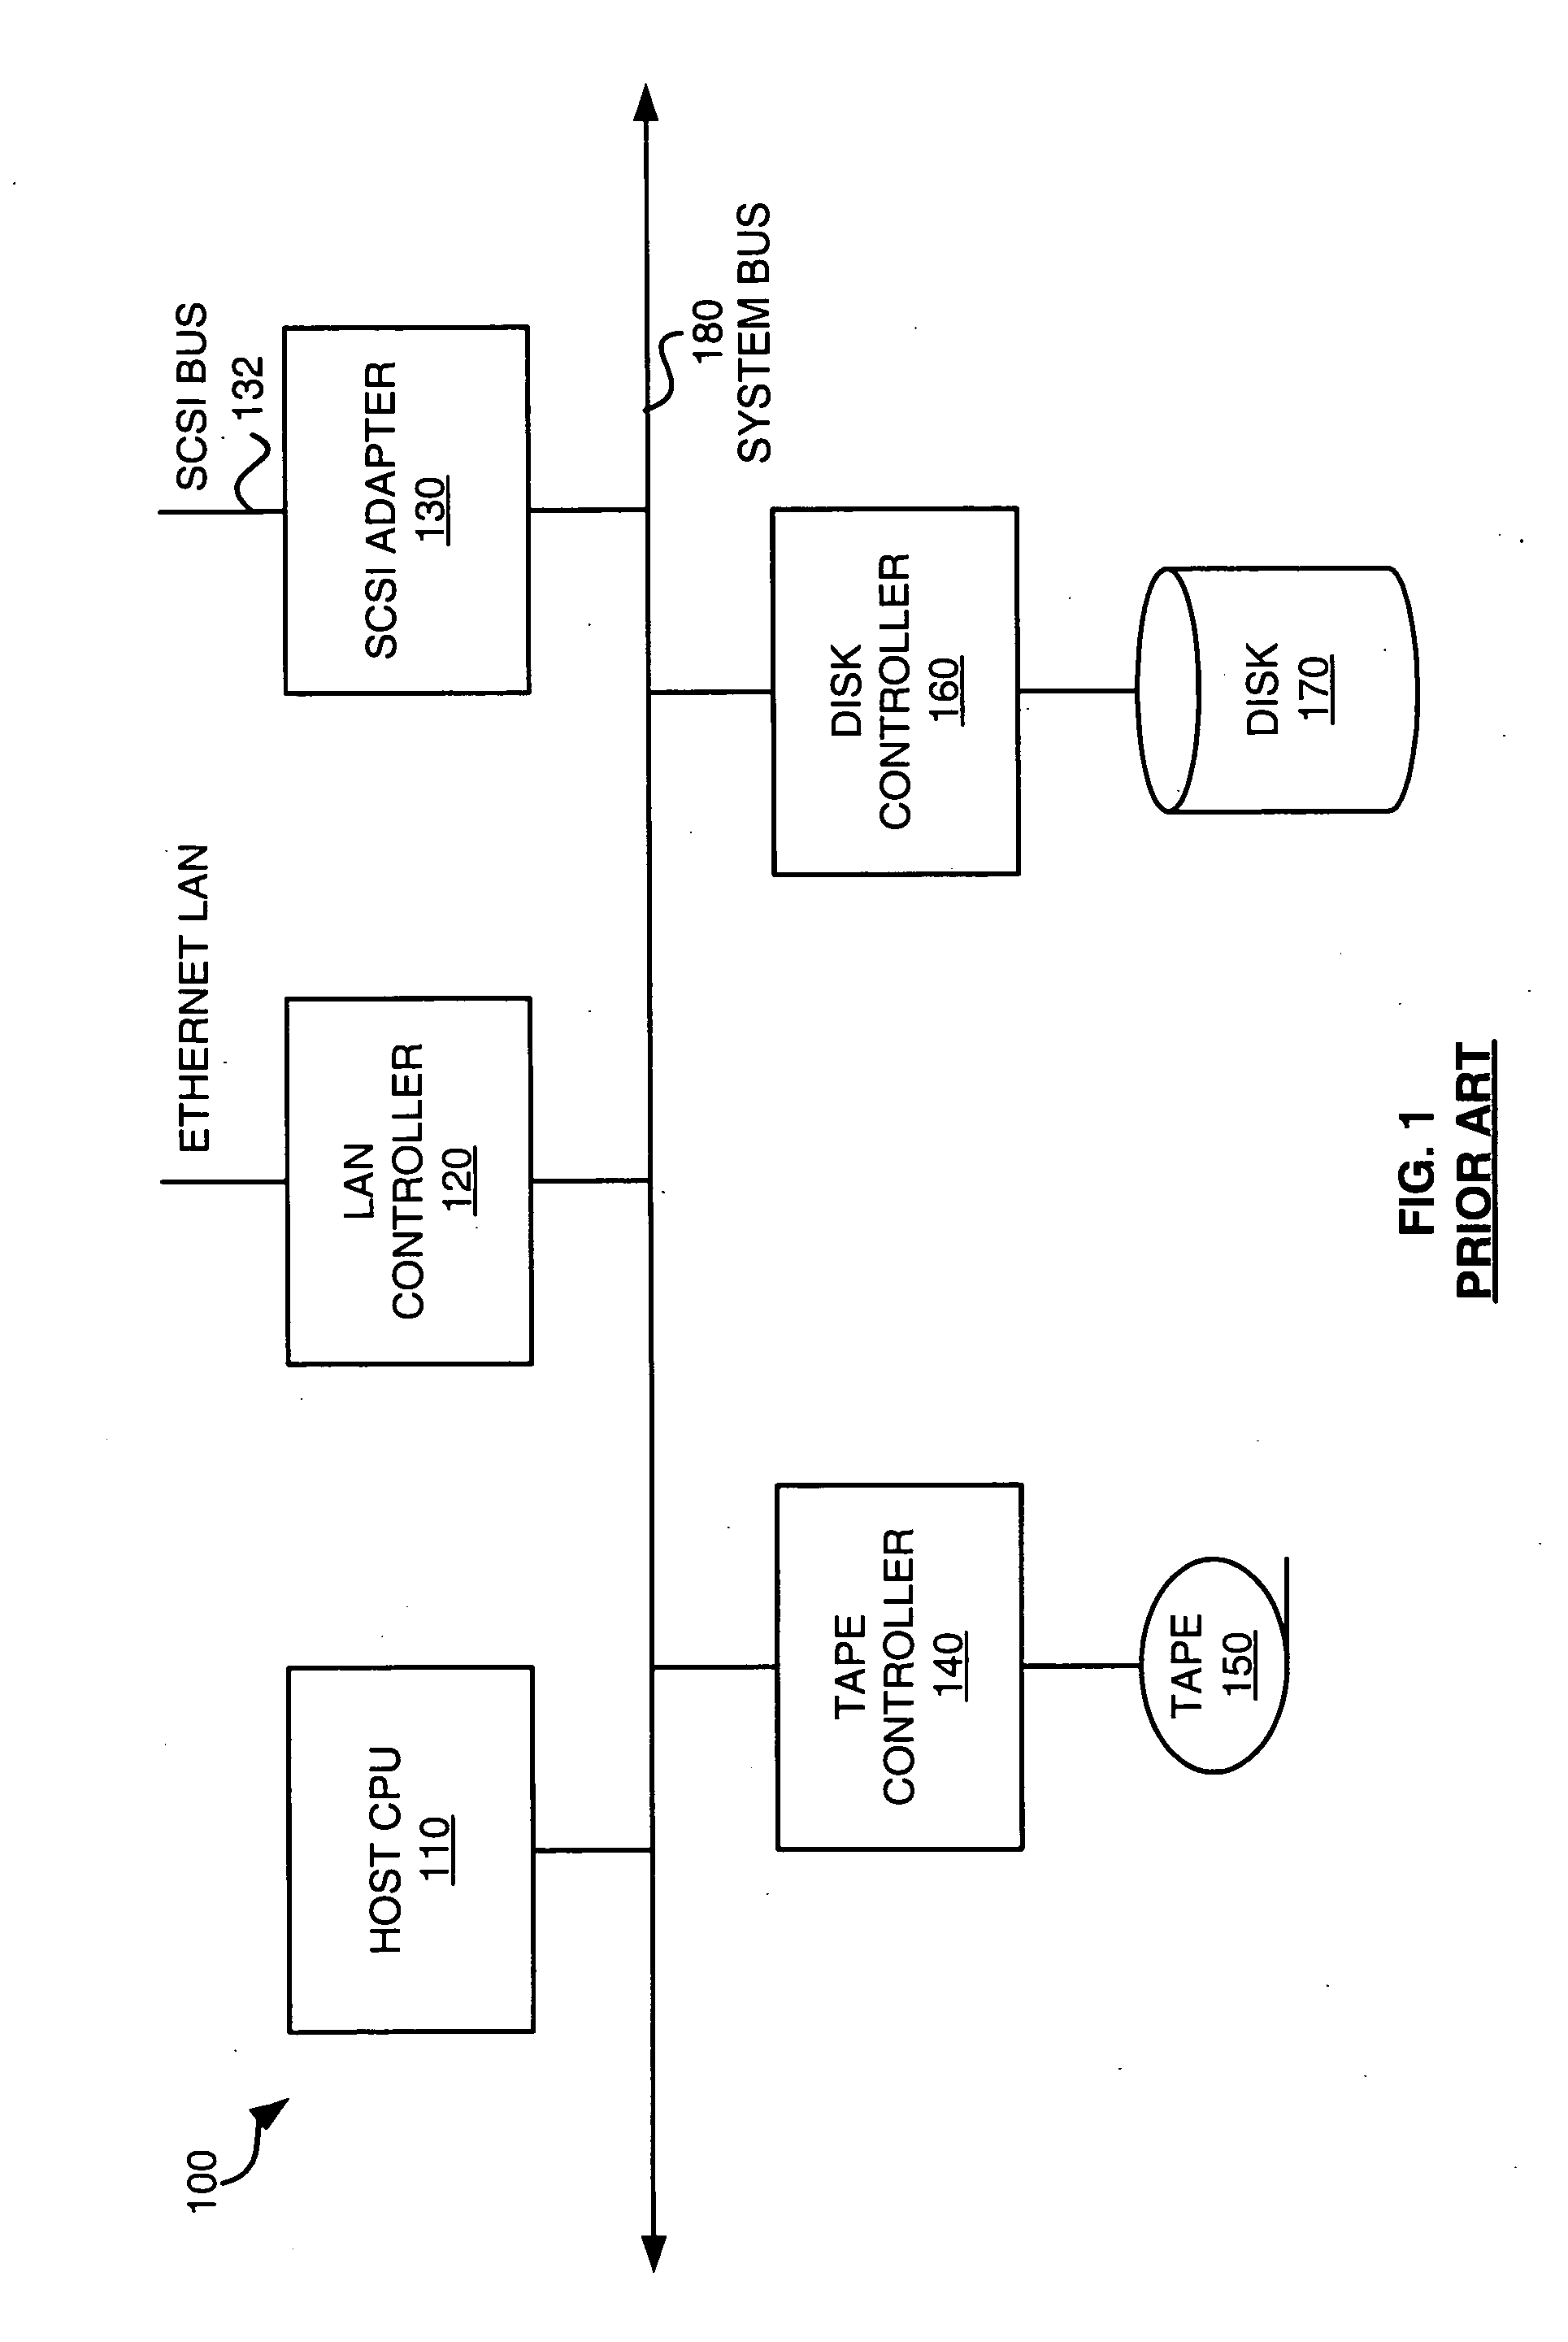 Systems and methods for storage filing